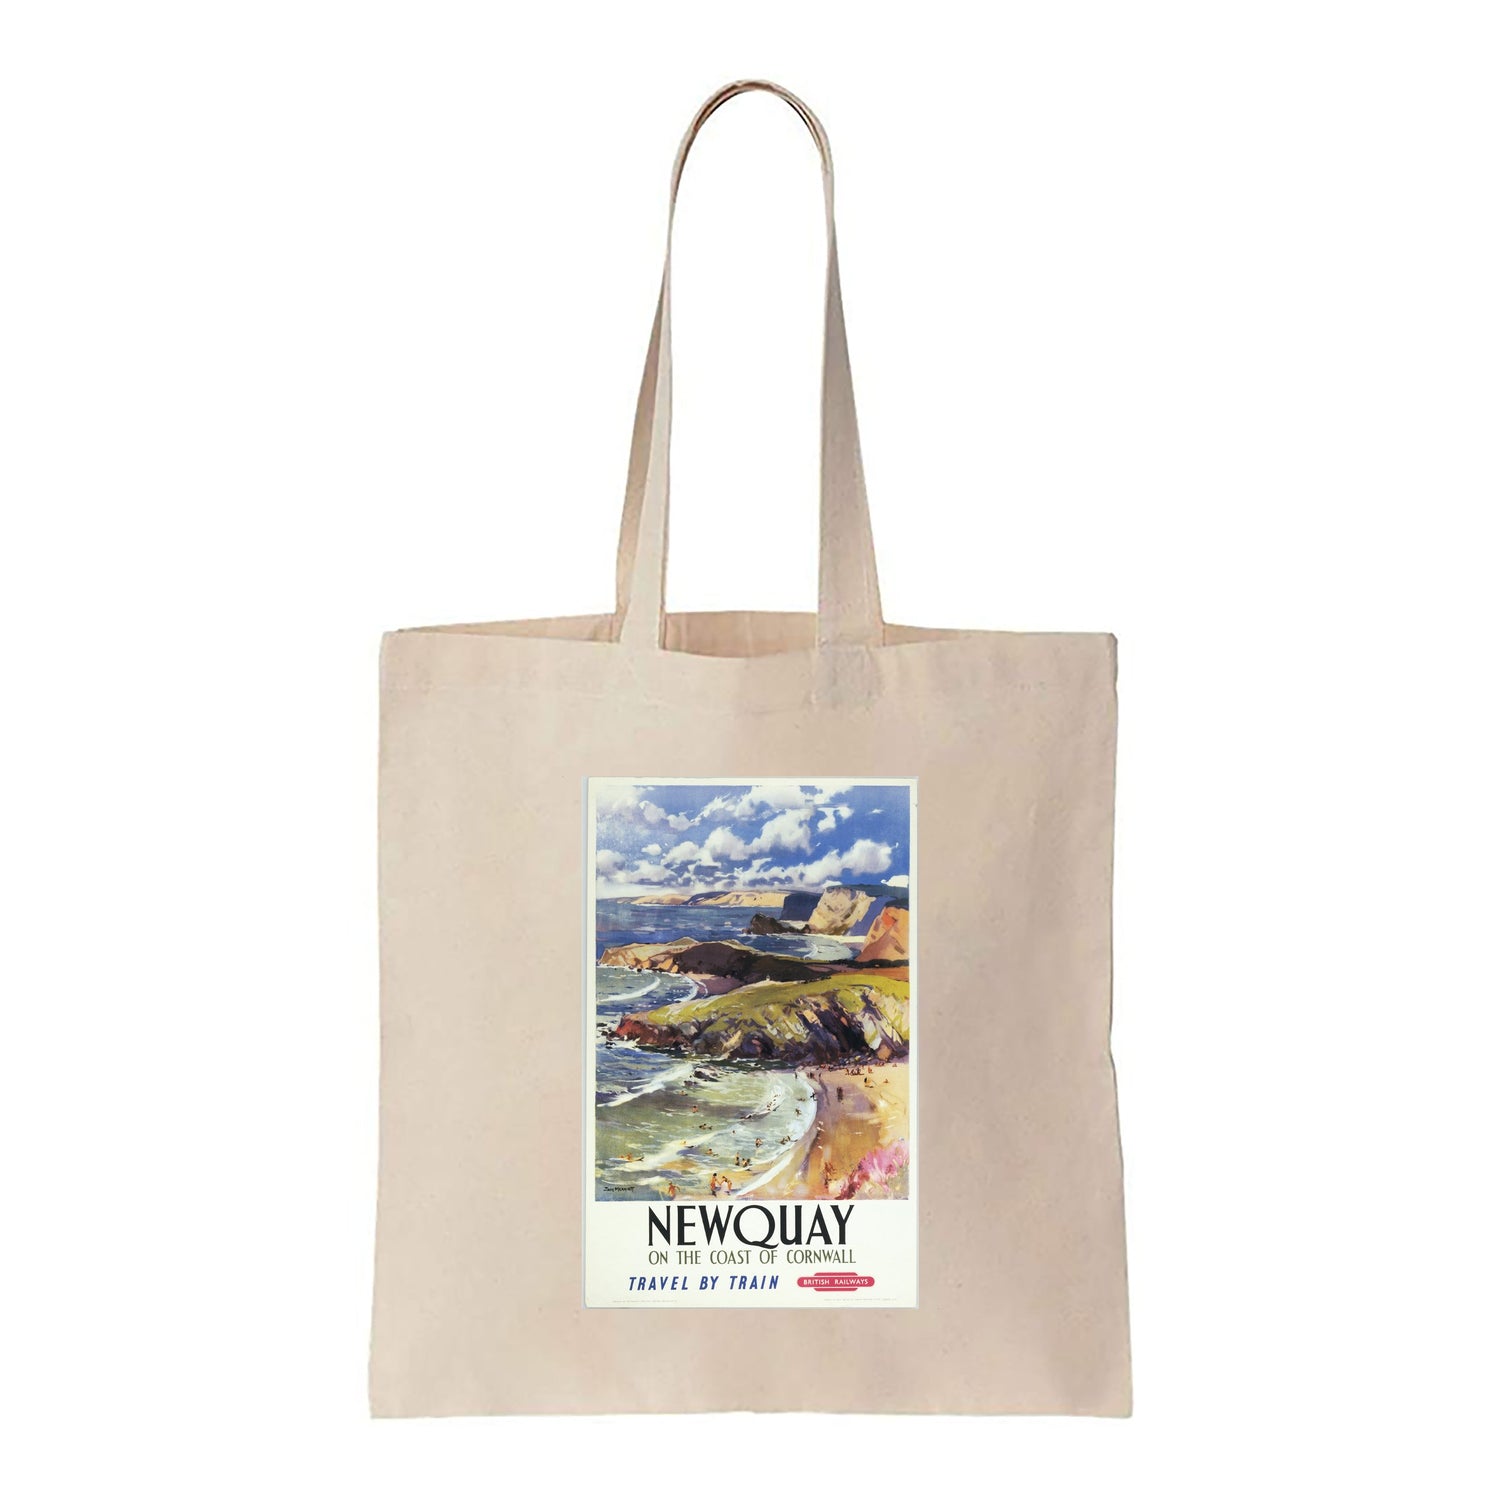 Newquay on the Coast of Cornwall - Canvas Tote Bag